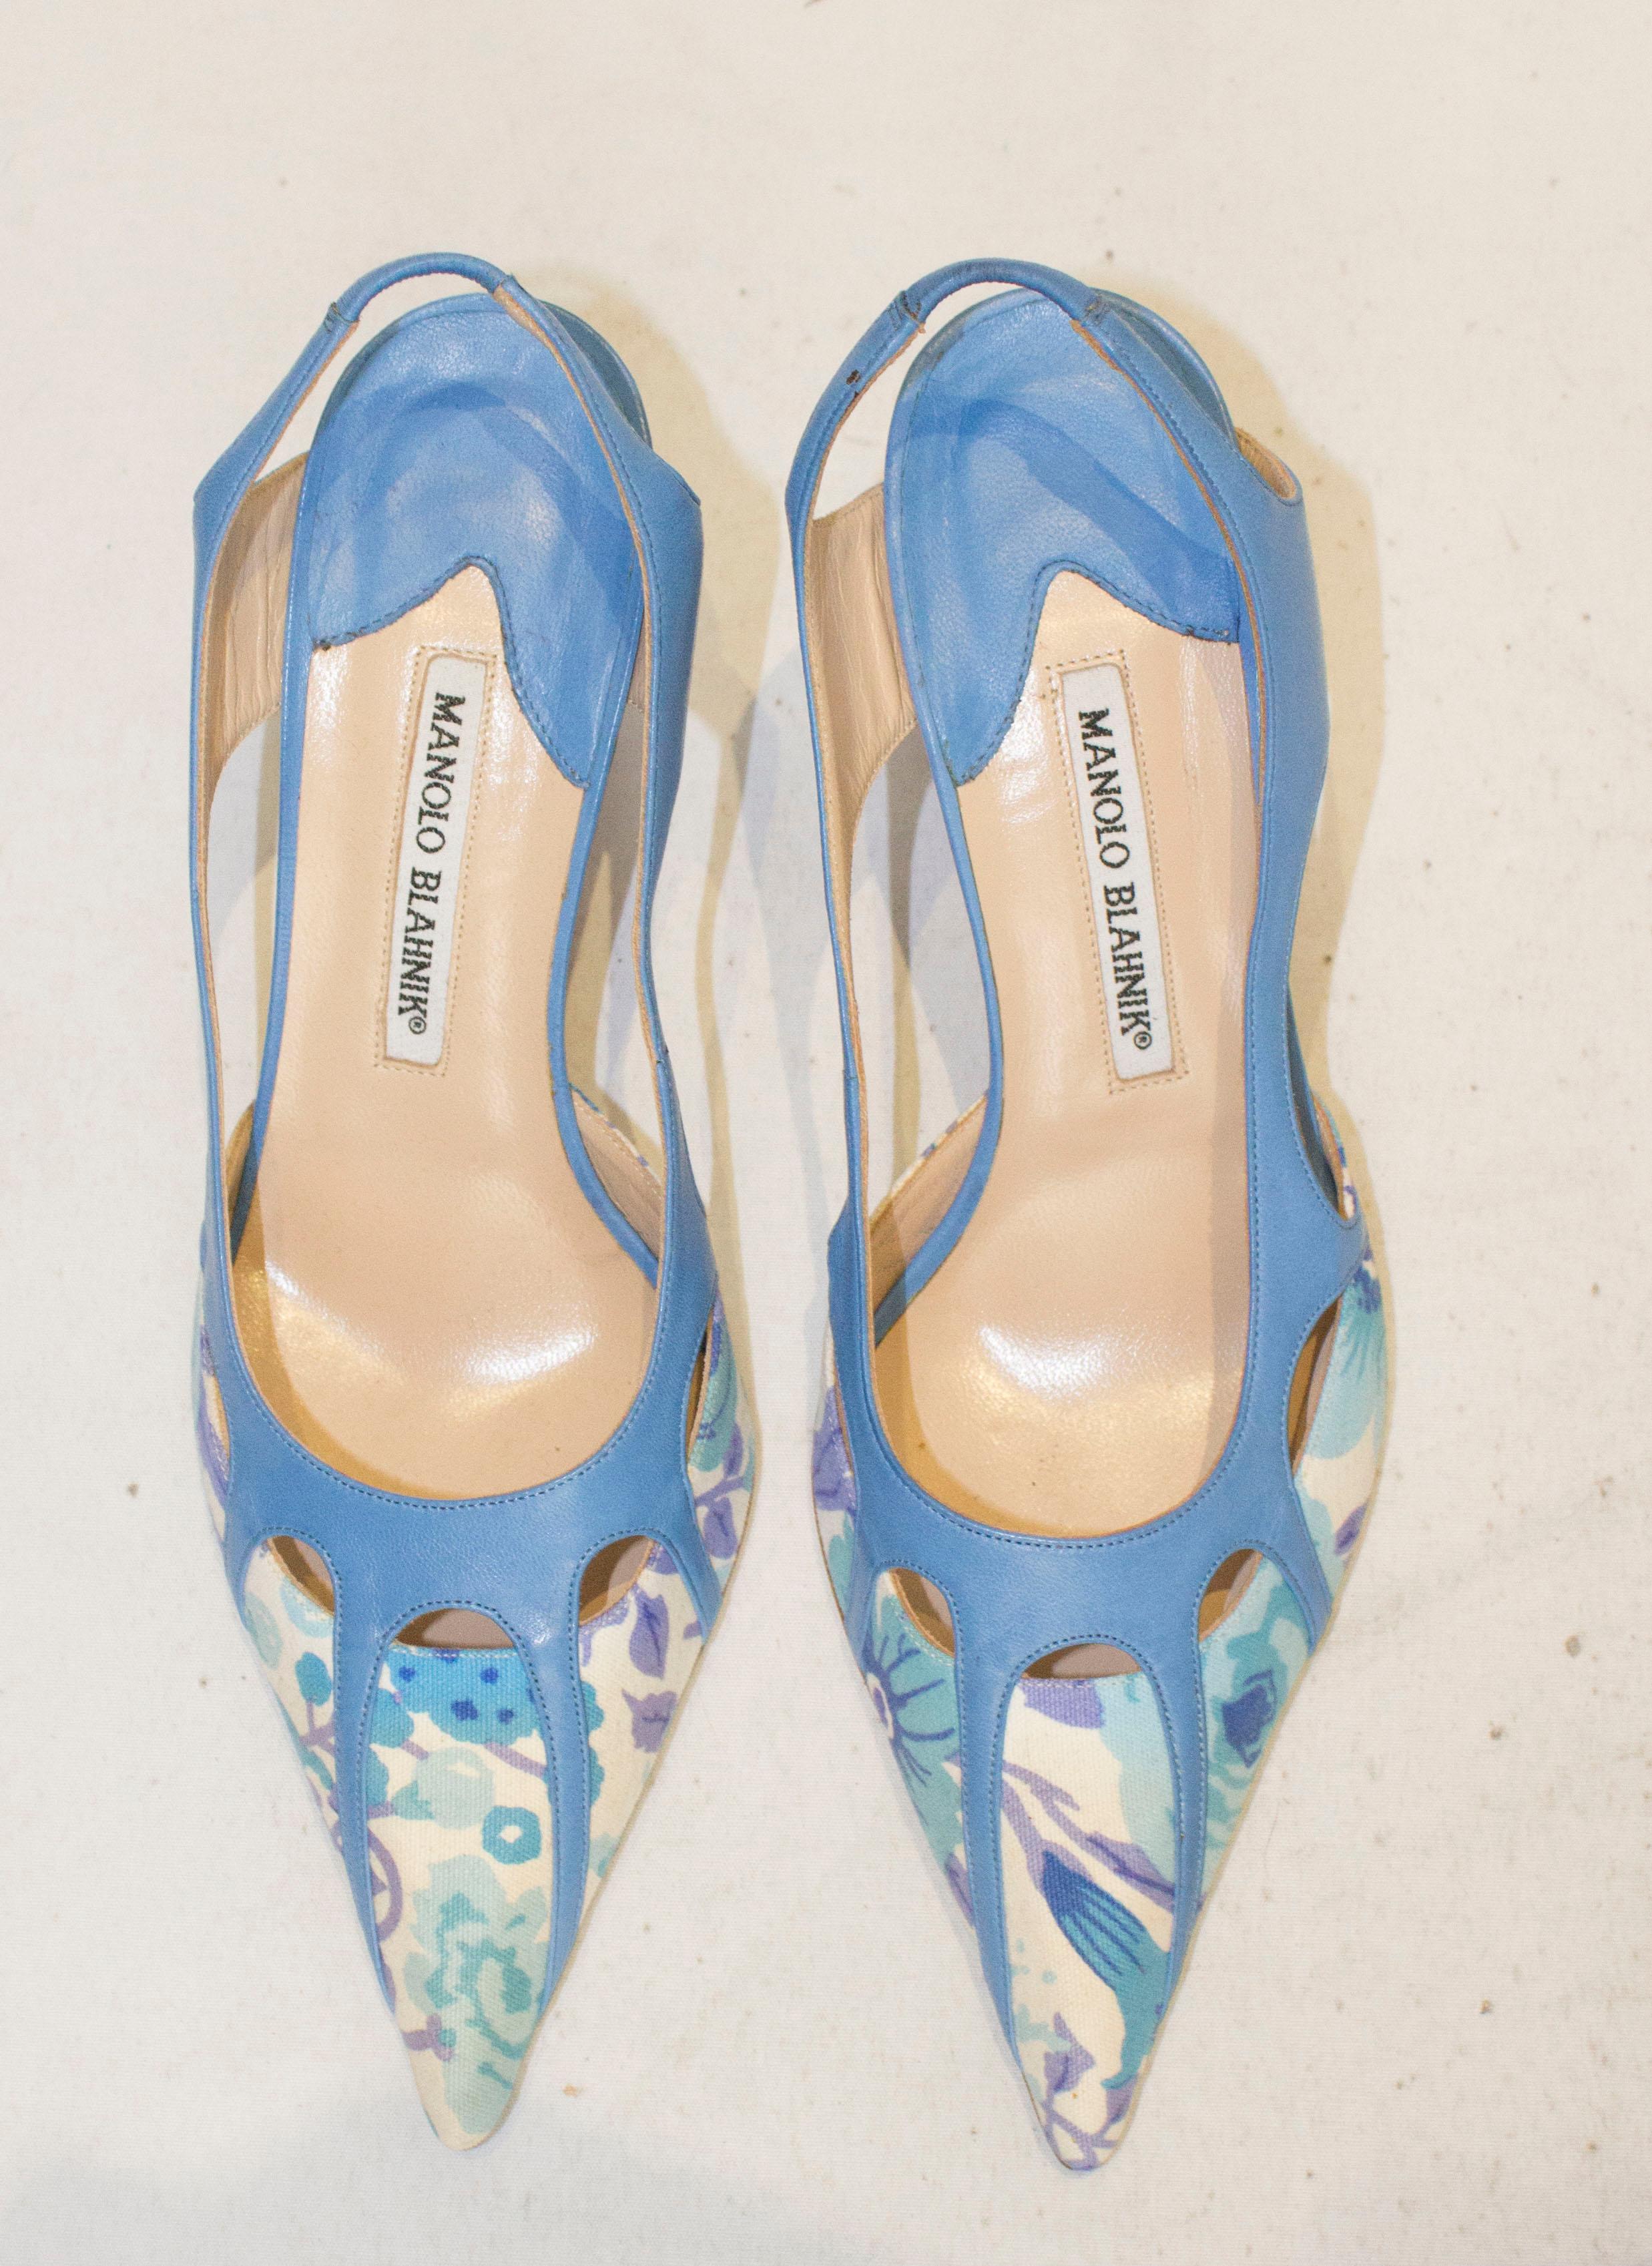 A chic pair of shoes for Summer by Manolo Blahnik. In sky blue leather and fabric , the shoes have a 3'' heel and are size 39 1/2.